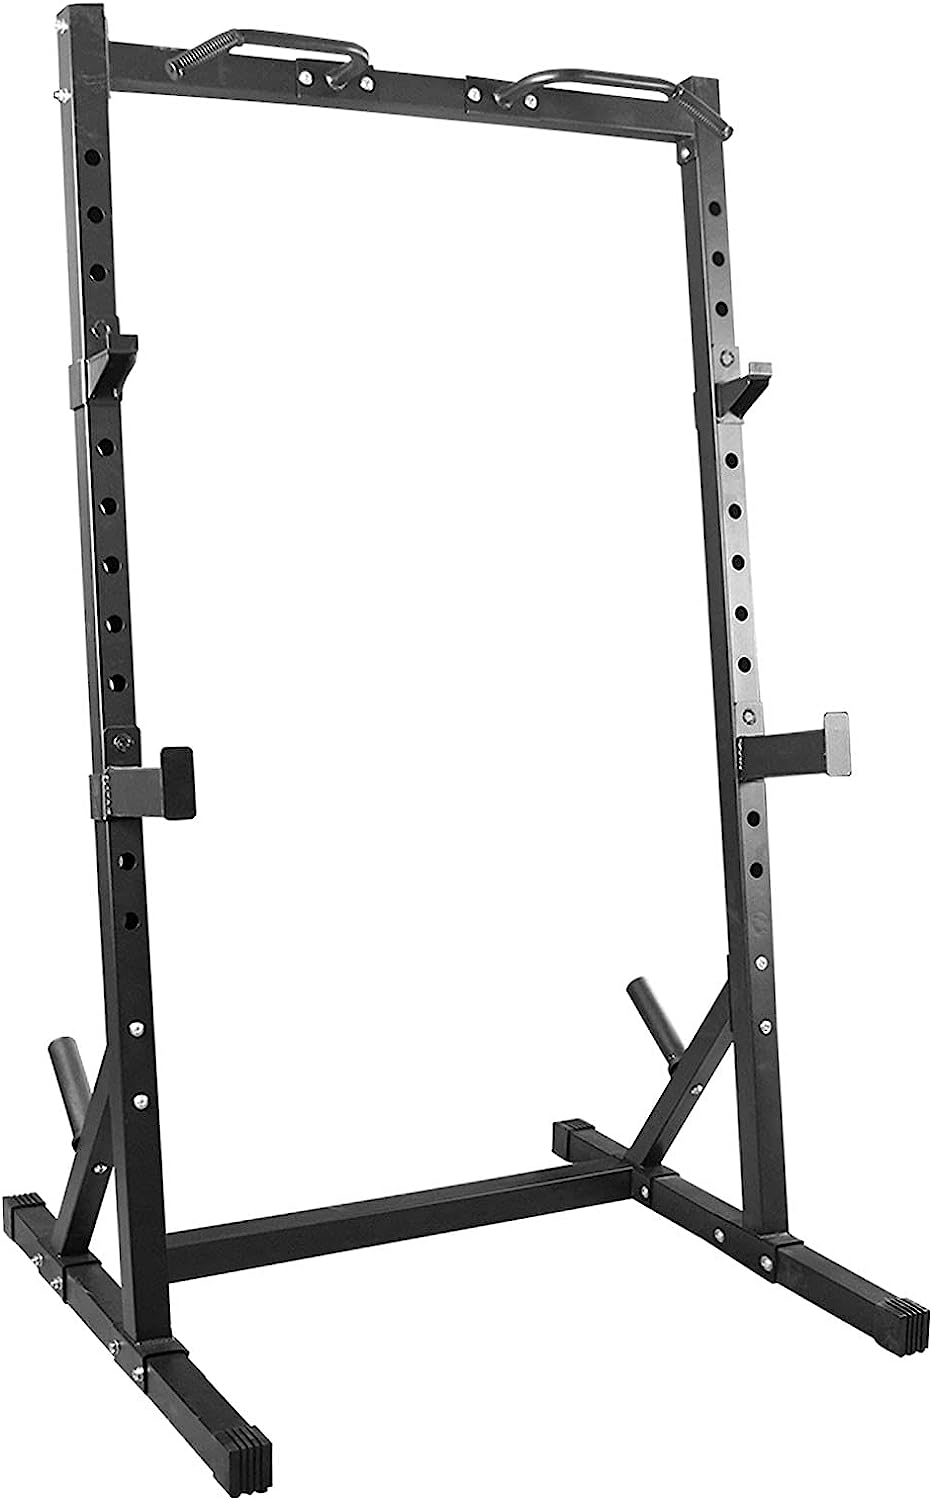 Equipment Rack 70 Half-Frame Power Cage Multifunctional Squat Rack Impregnation Station for Home or Gymnasium Rack Attachment 2x2 (Black, One Size)